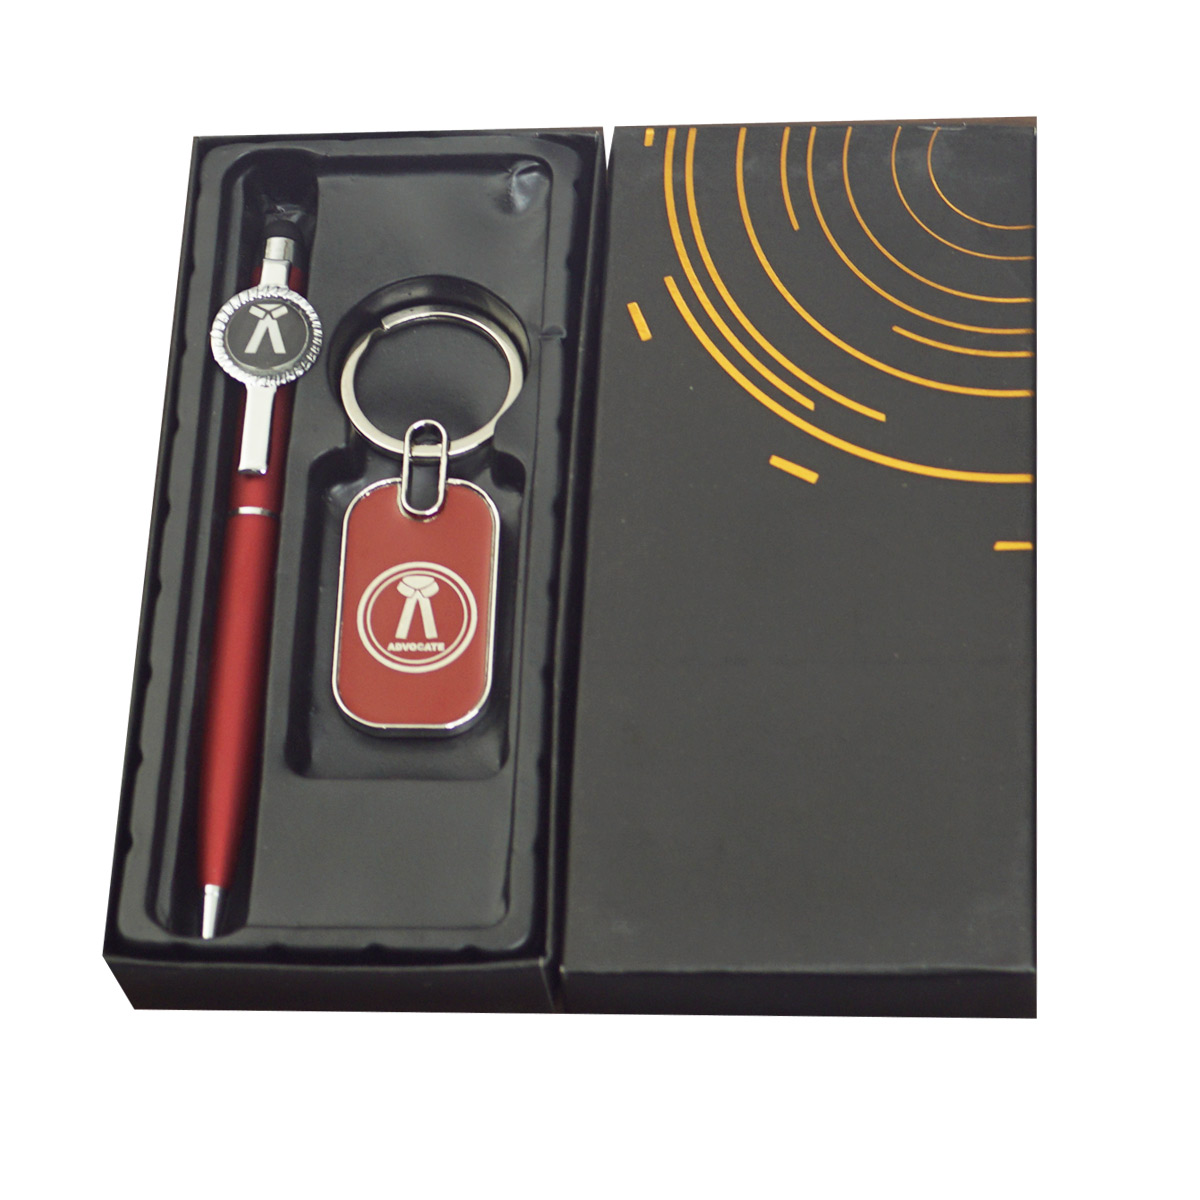 penhouse.in Mat Finish Red Color Body  With Advocate Symbol Keychain Twist Type Ball Pen Set SKU 23606